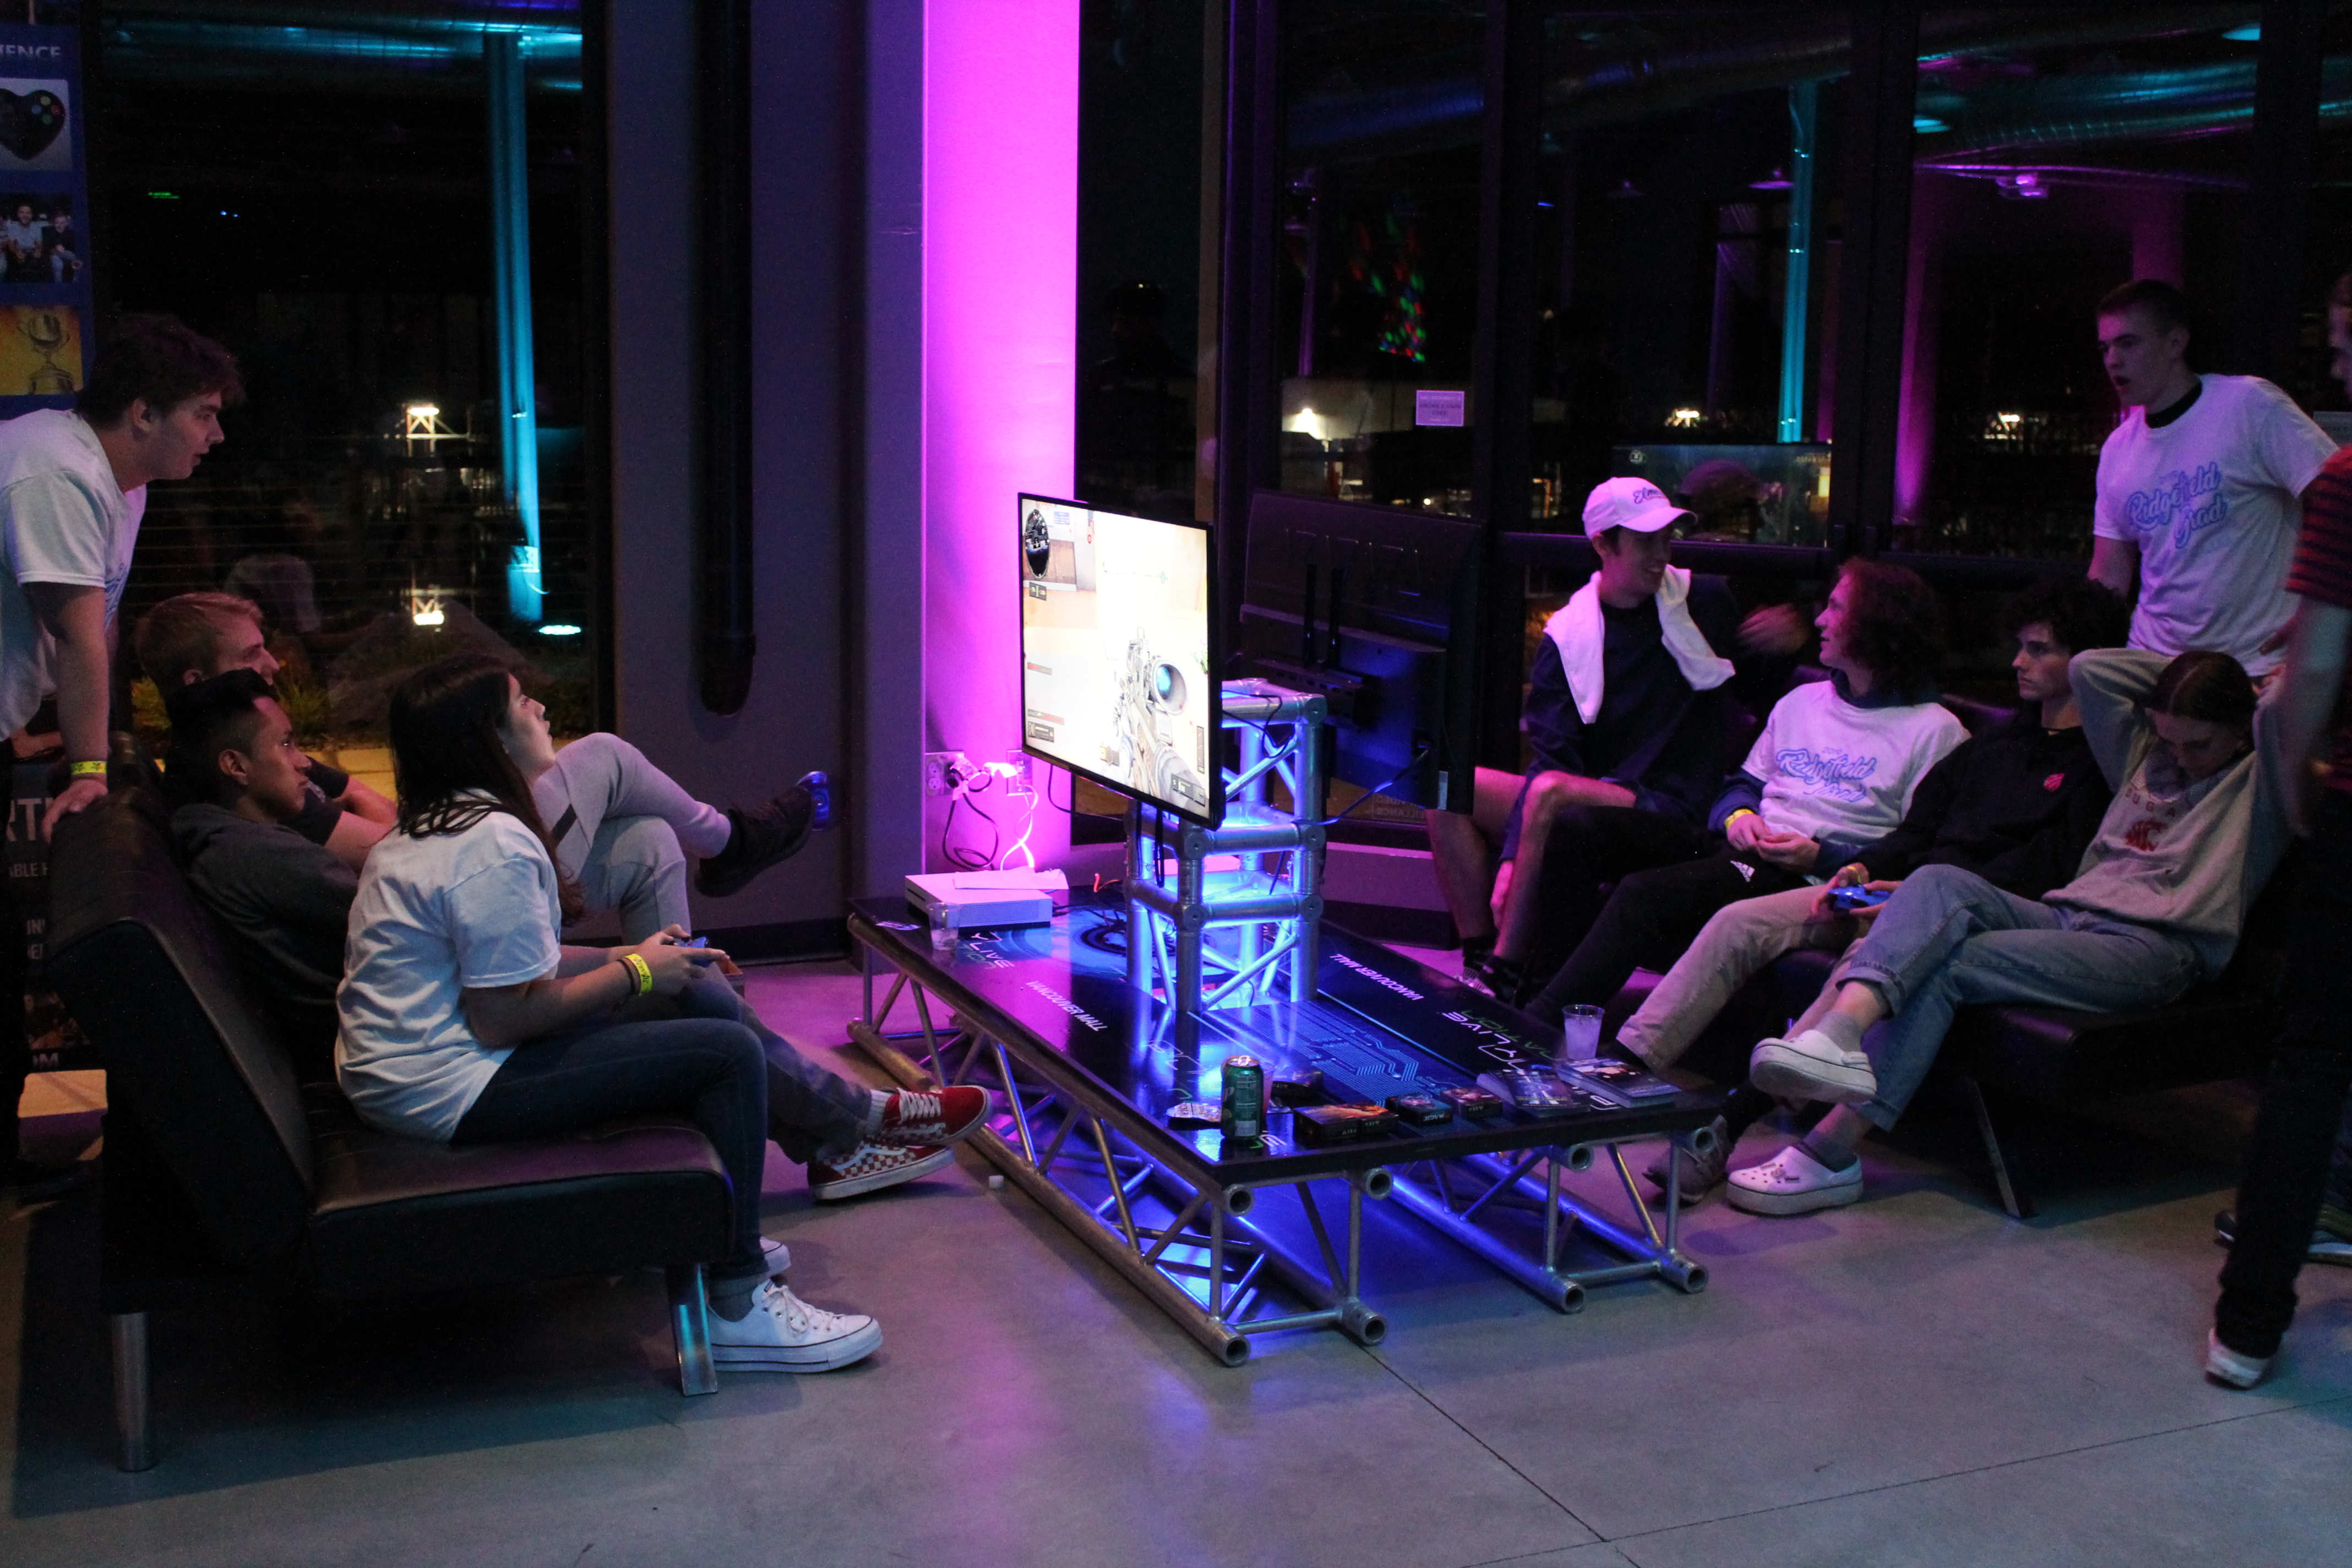 Group of young people playing video games at event